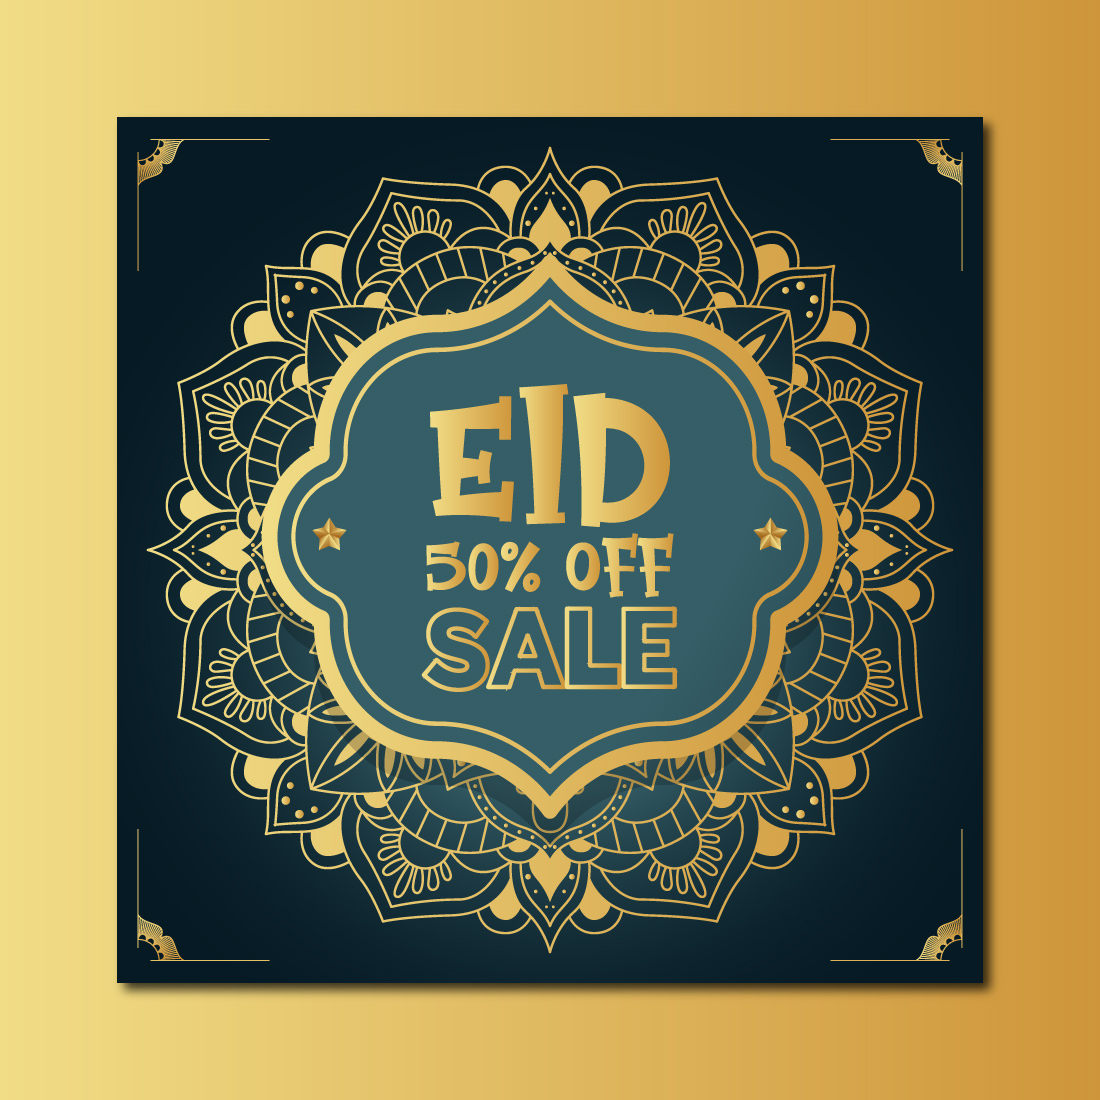 eid mubarak creative sale and discount banner or tag design cover image.